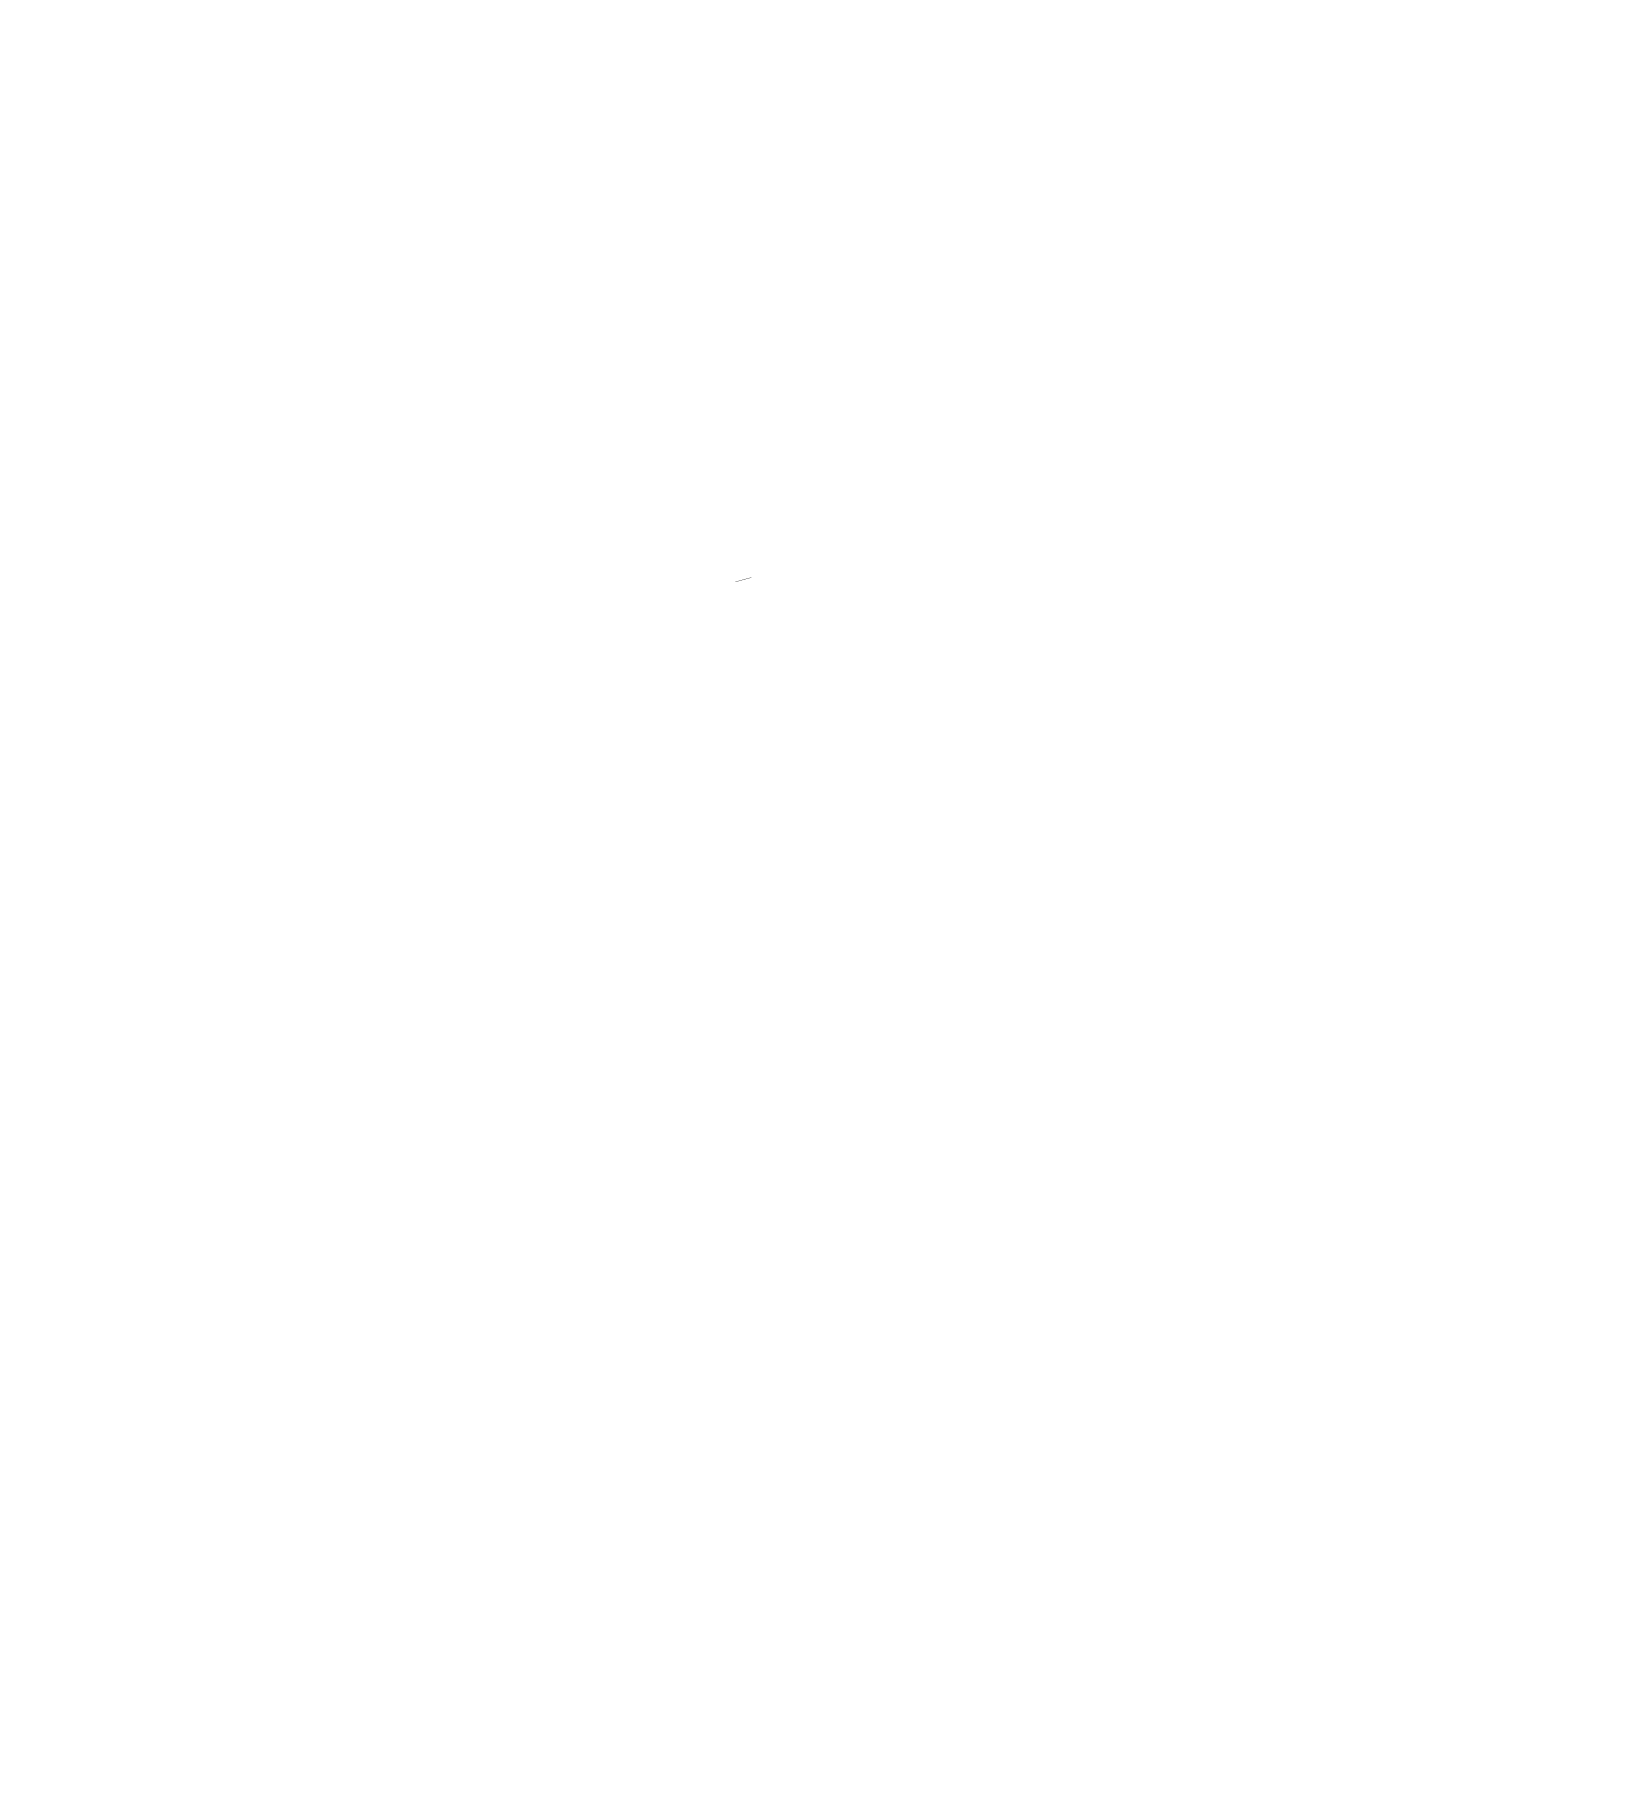 Cryo and Sports Recovery Logo